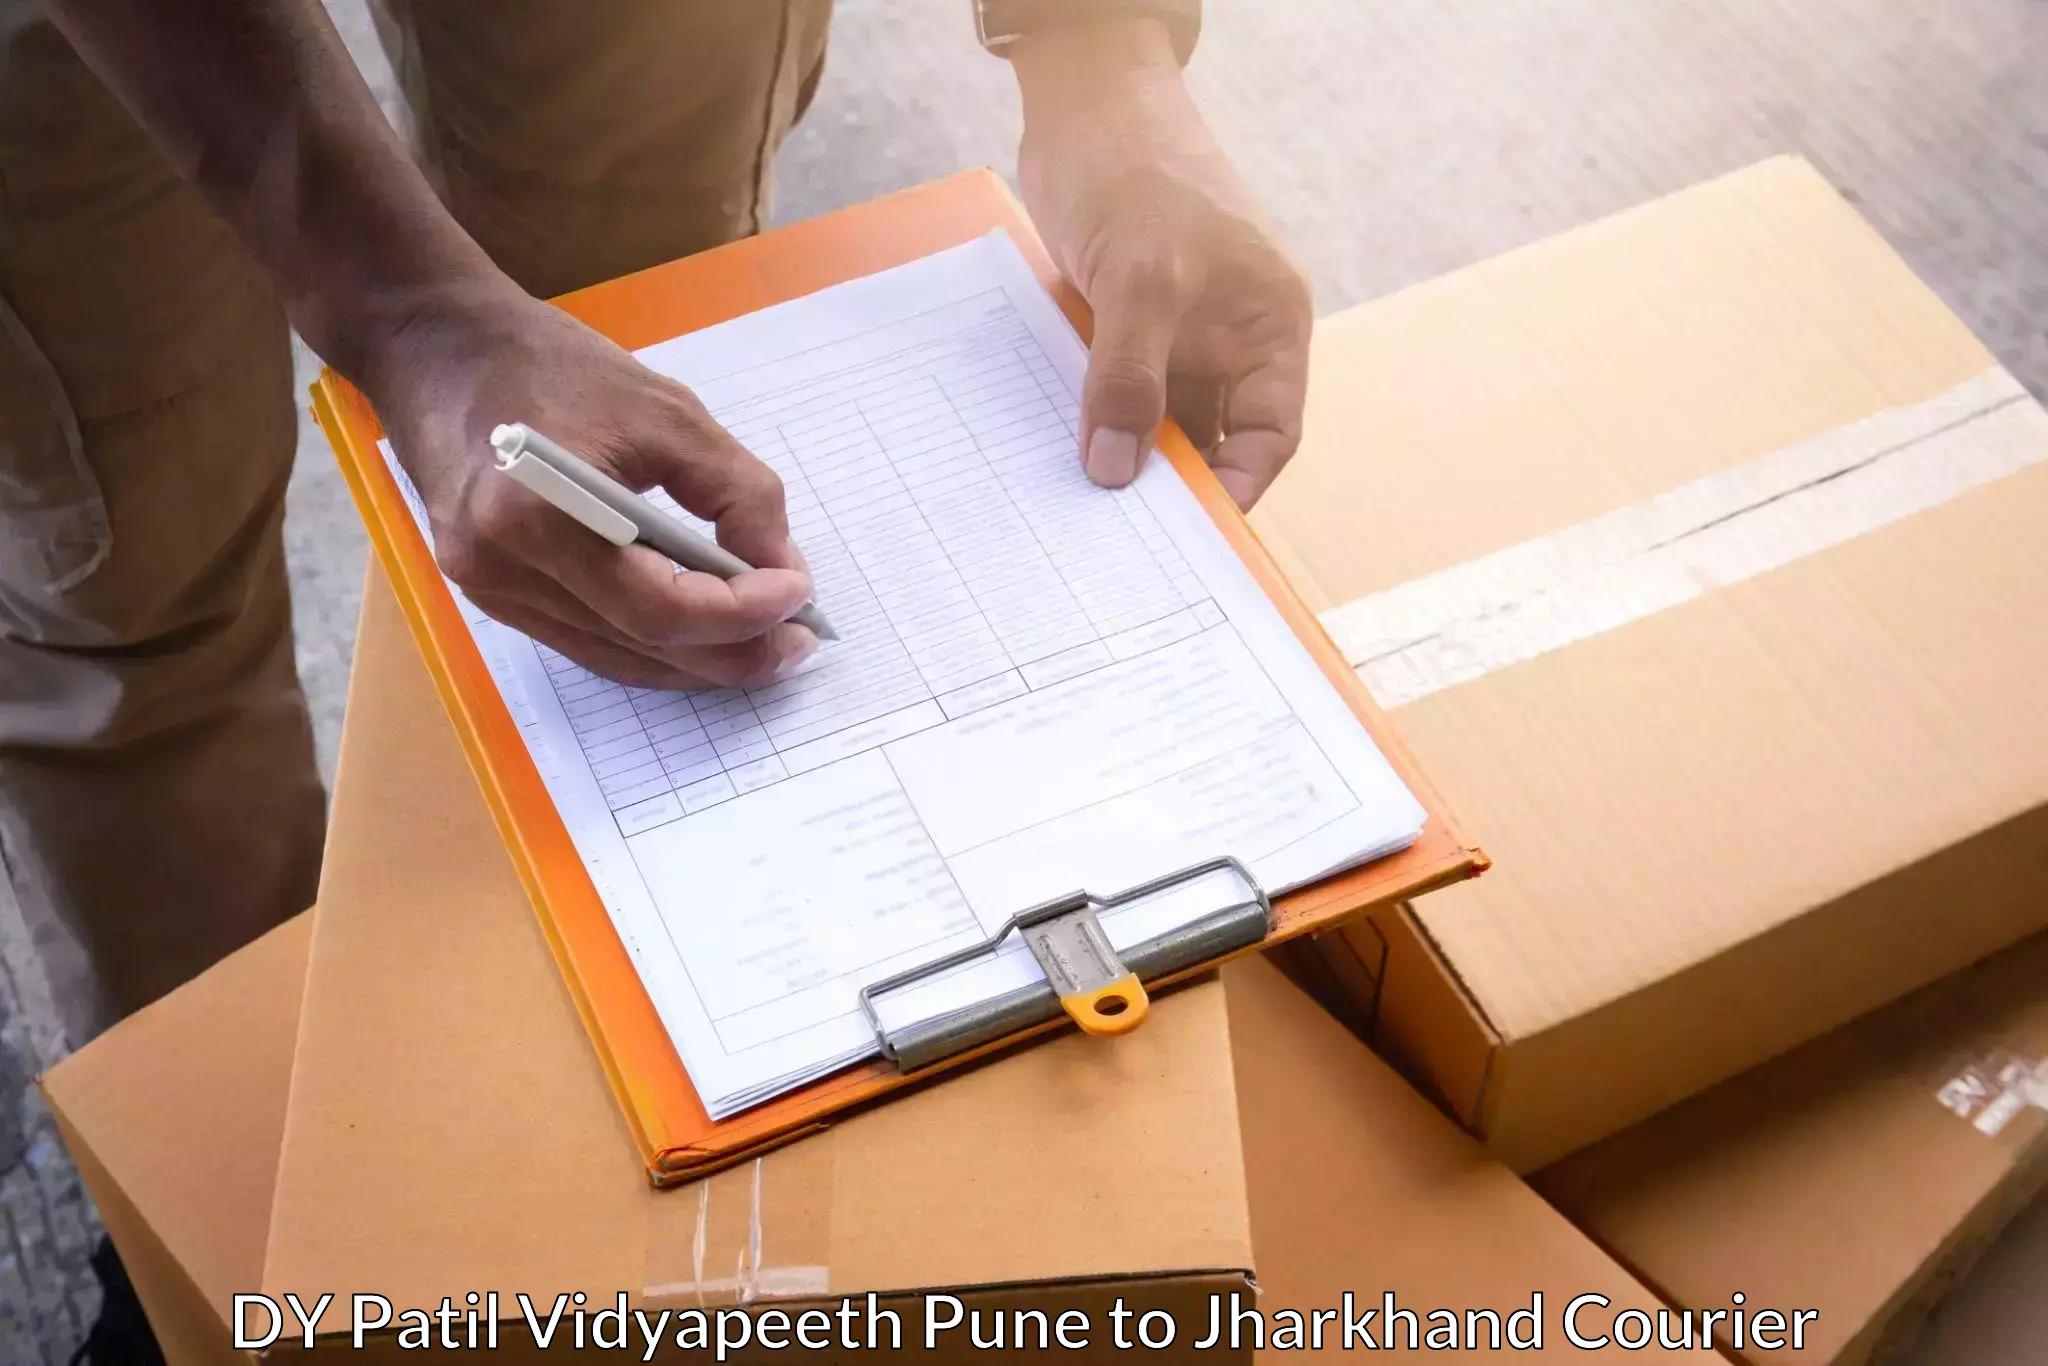 Advanced delivery network DY Patil Vidyapeeth Pune to Jharia